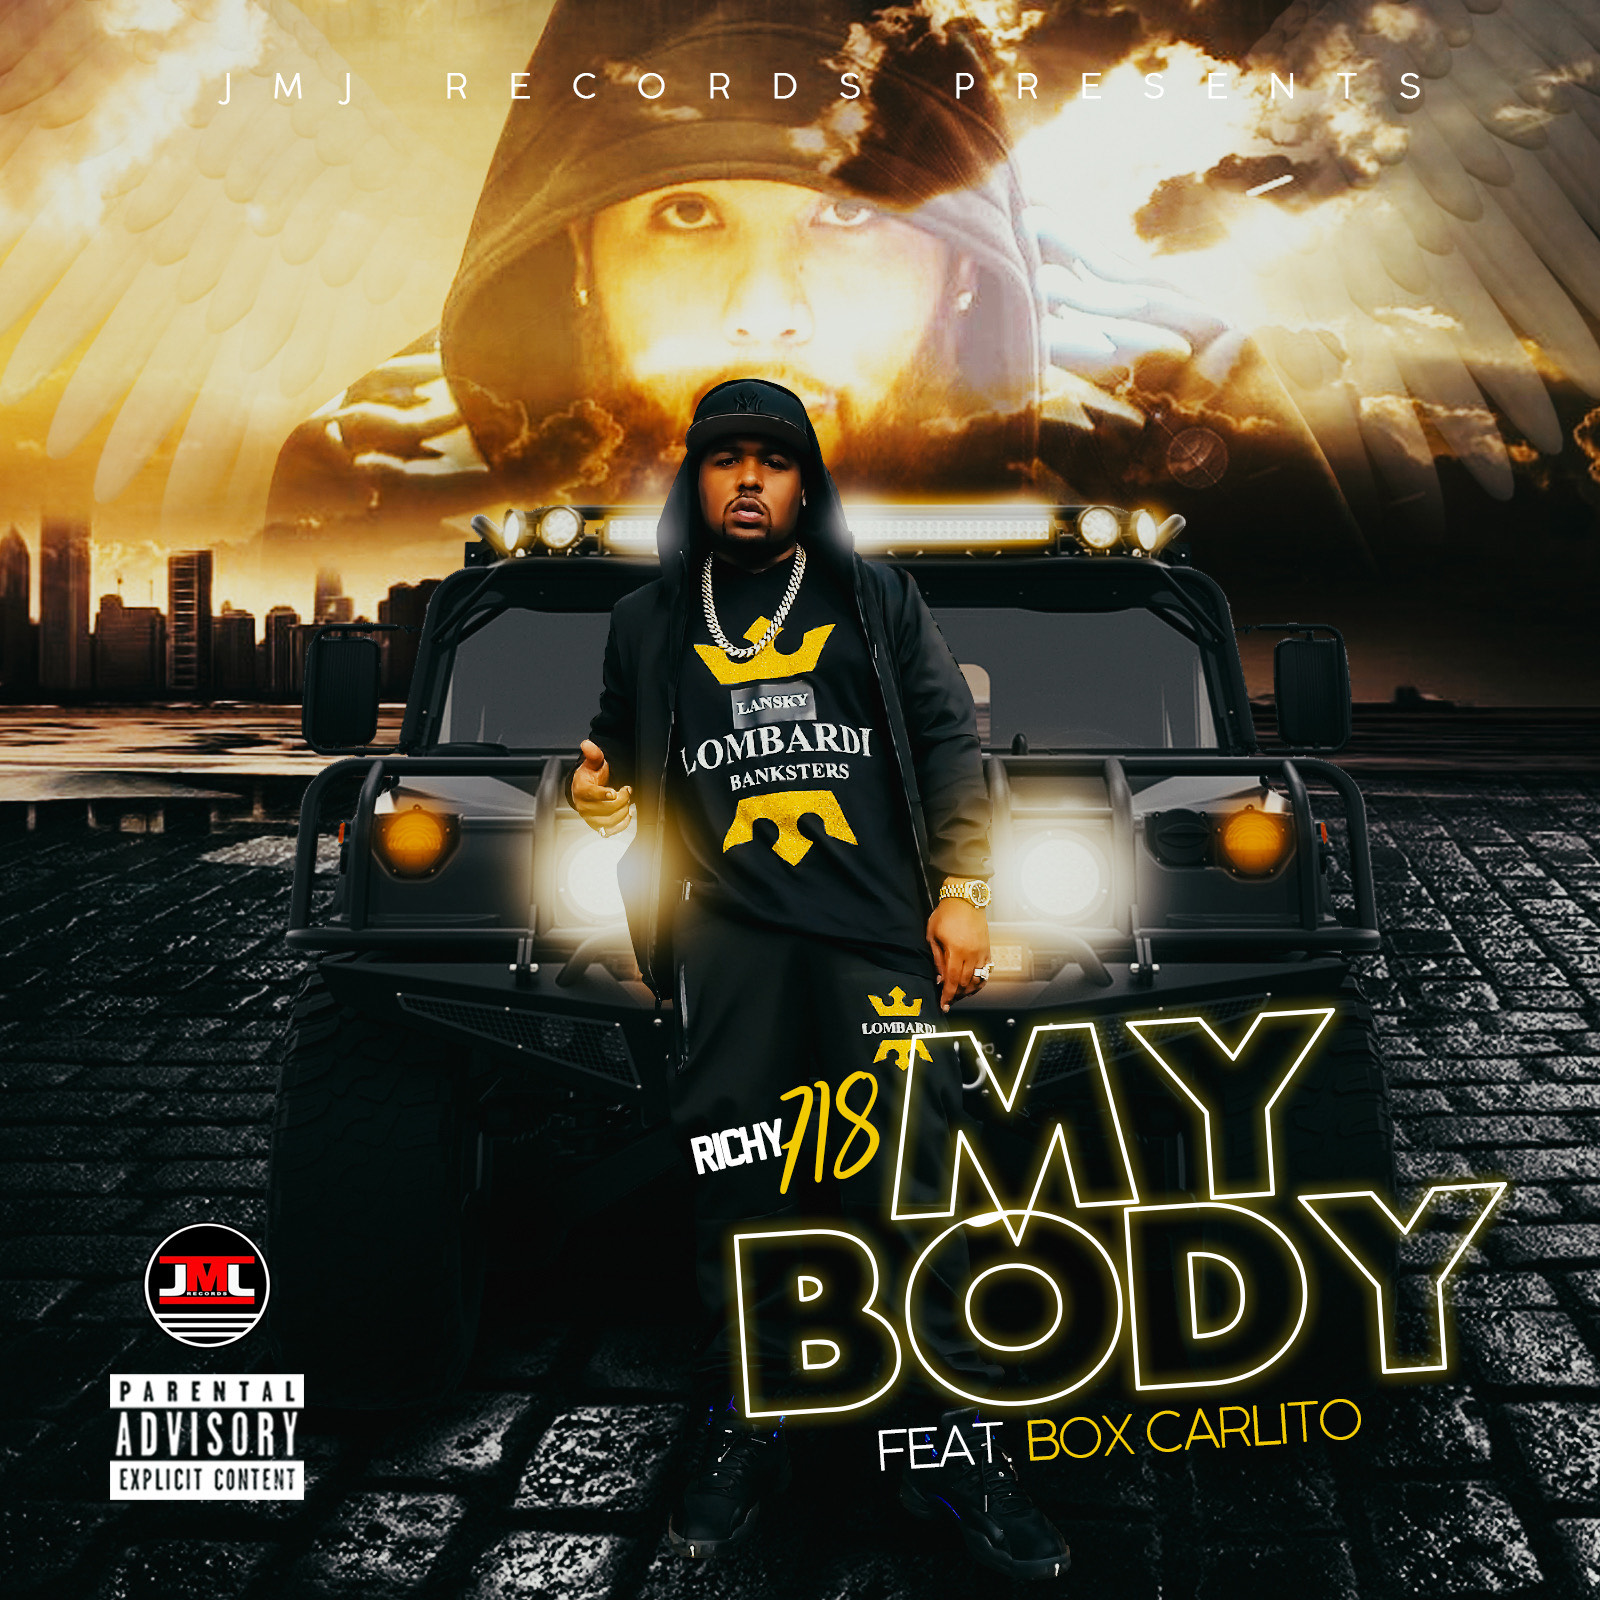 Richy 718 Joins Forces With Box Carlito For New Single “My Body”